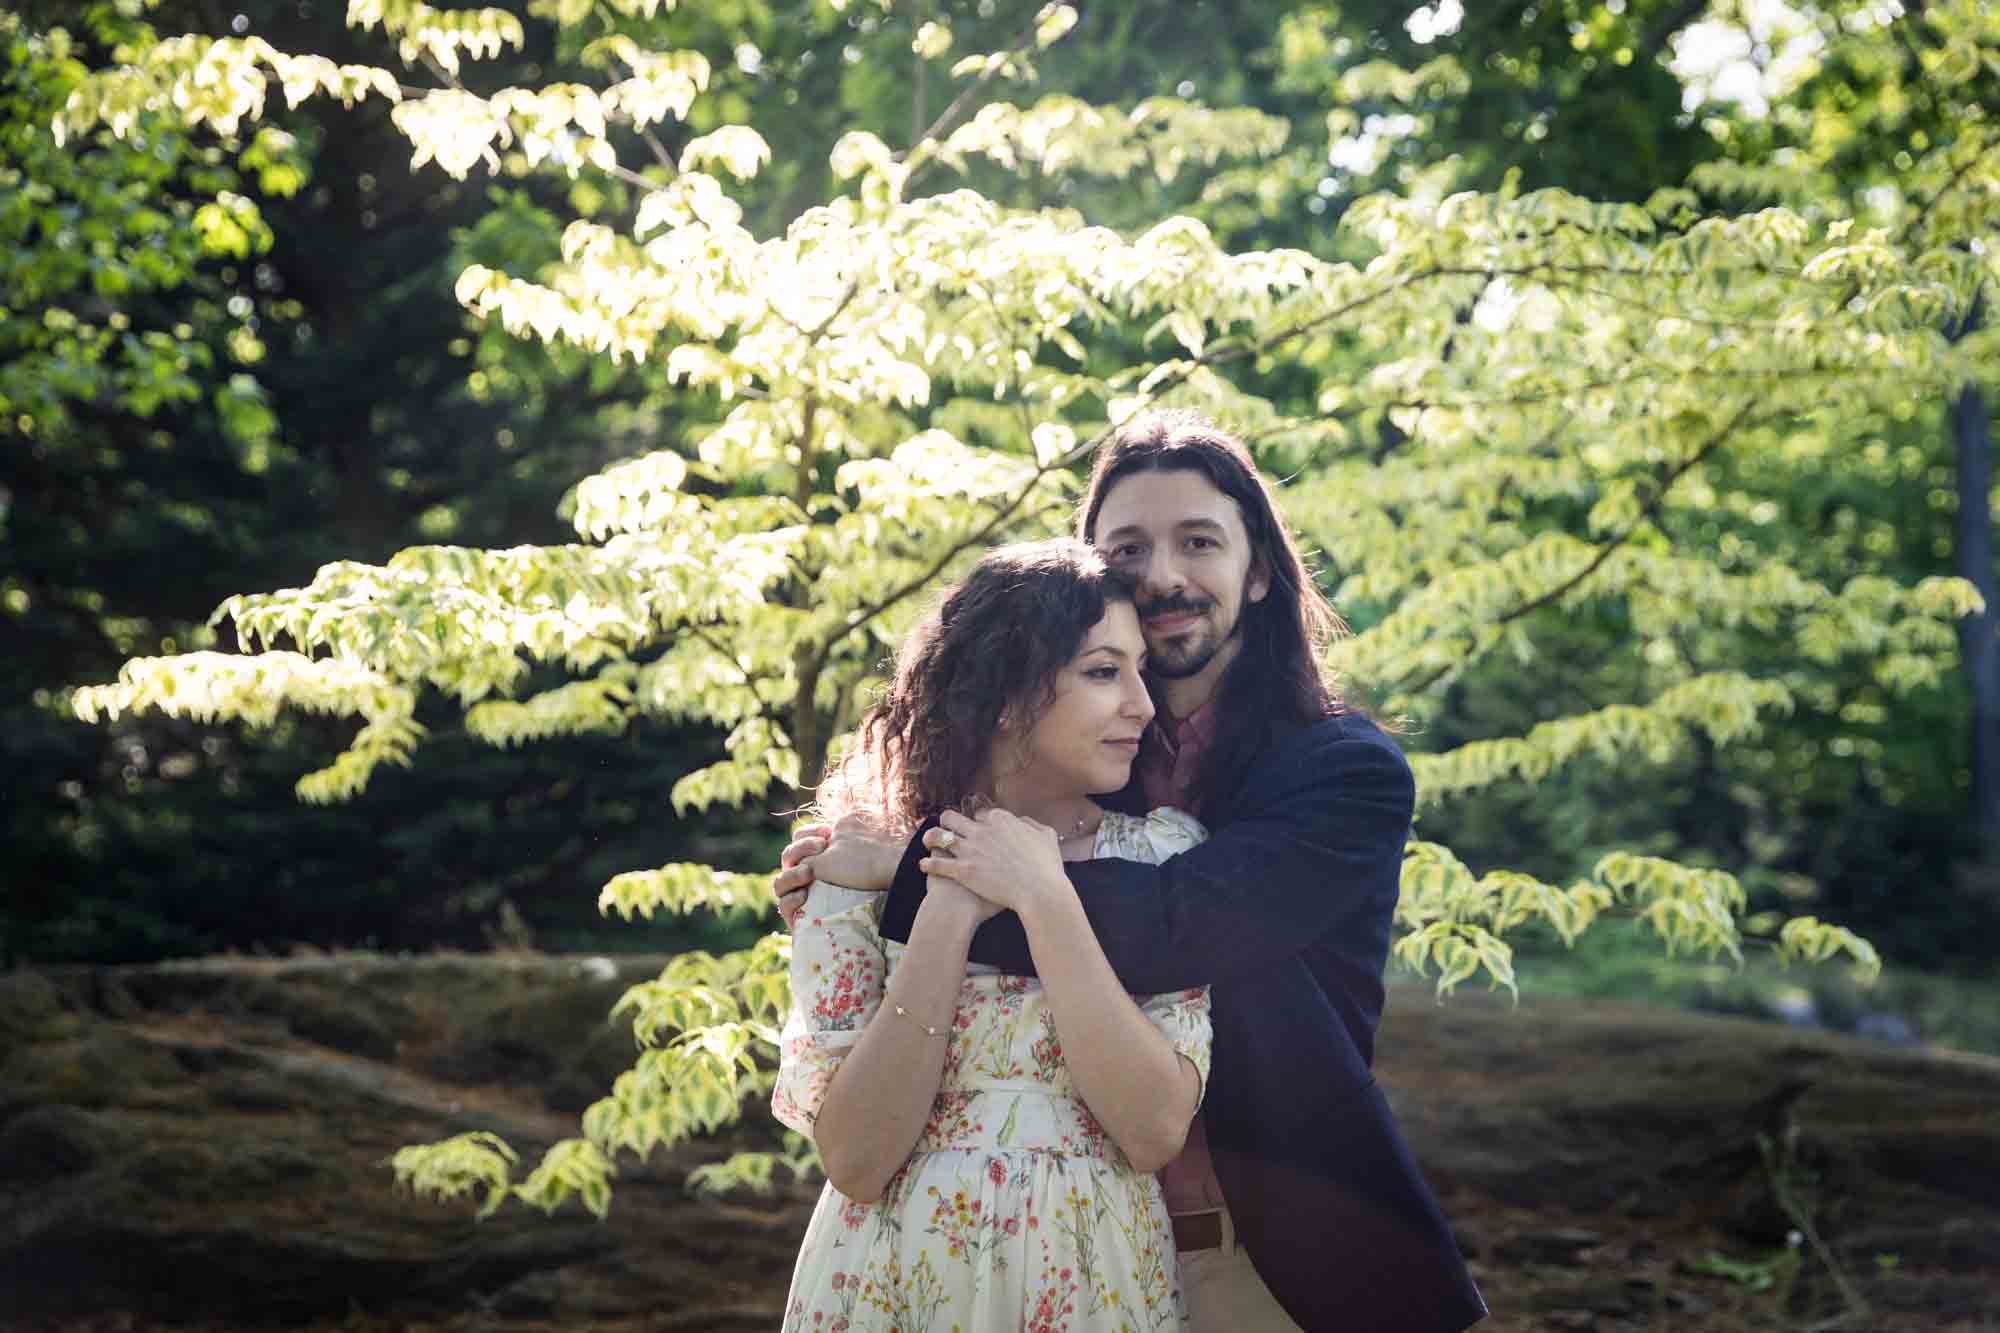 Man hugging woman by the shoulders in New York Botanical Garden during engagement photo shoot